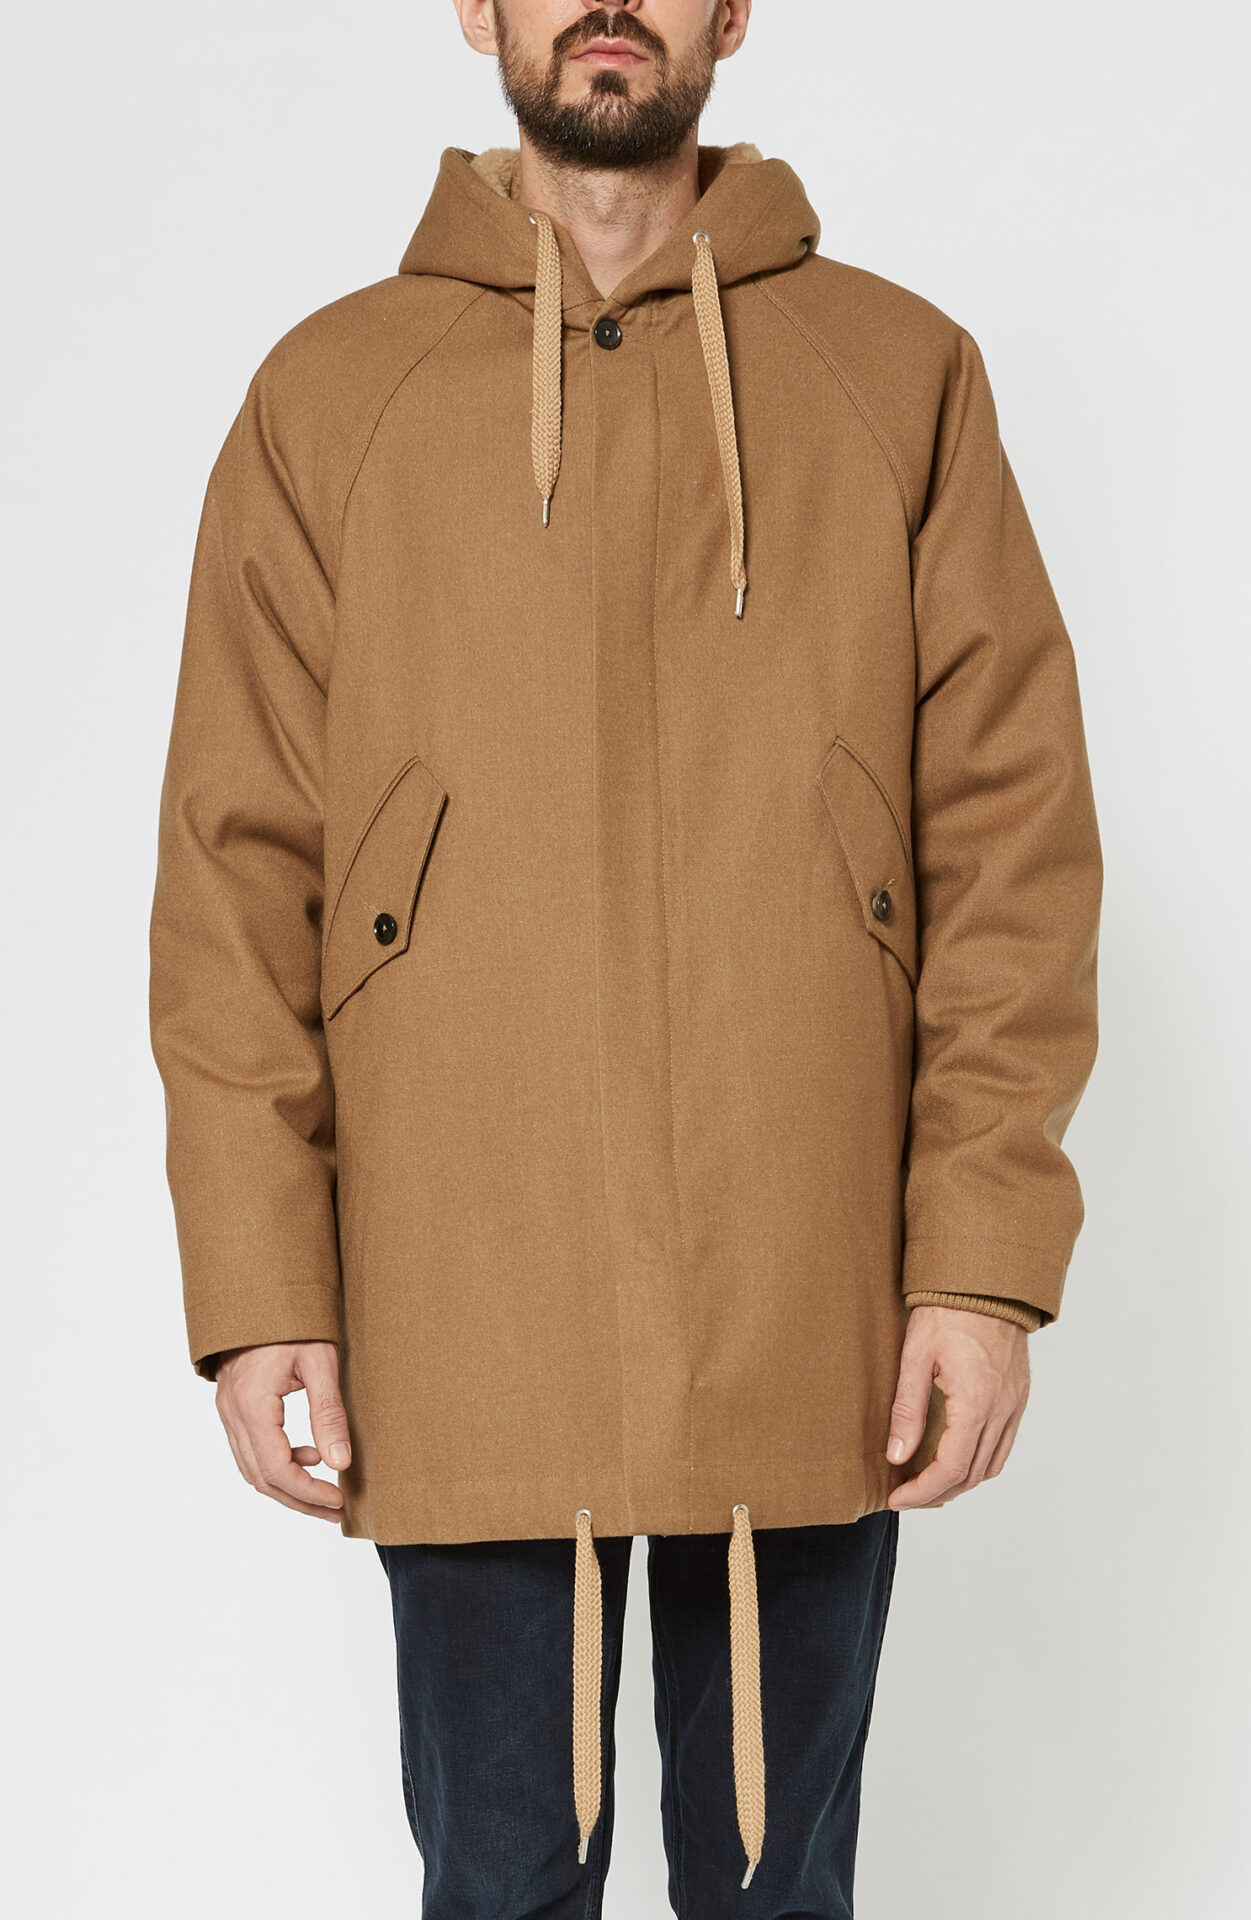 Anyone liter scrub A Kind Of Guise - Camel brown "Bug" parka 2.0 - Schwittenberg